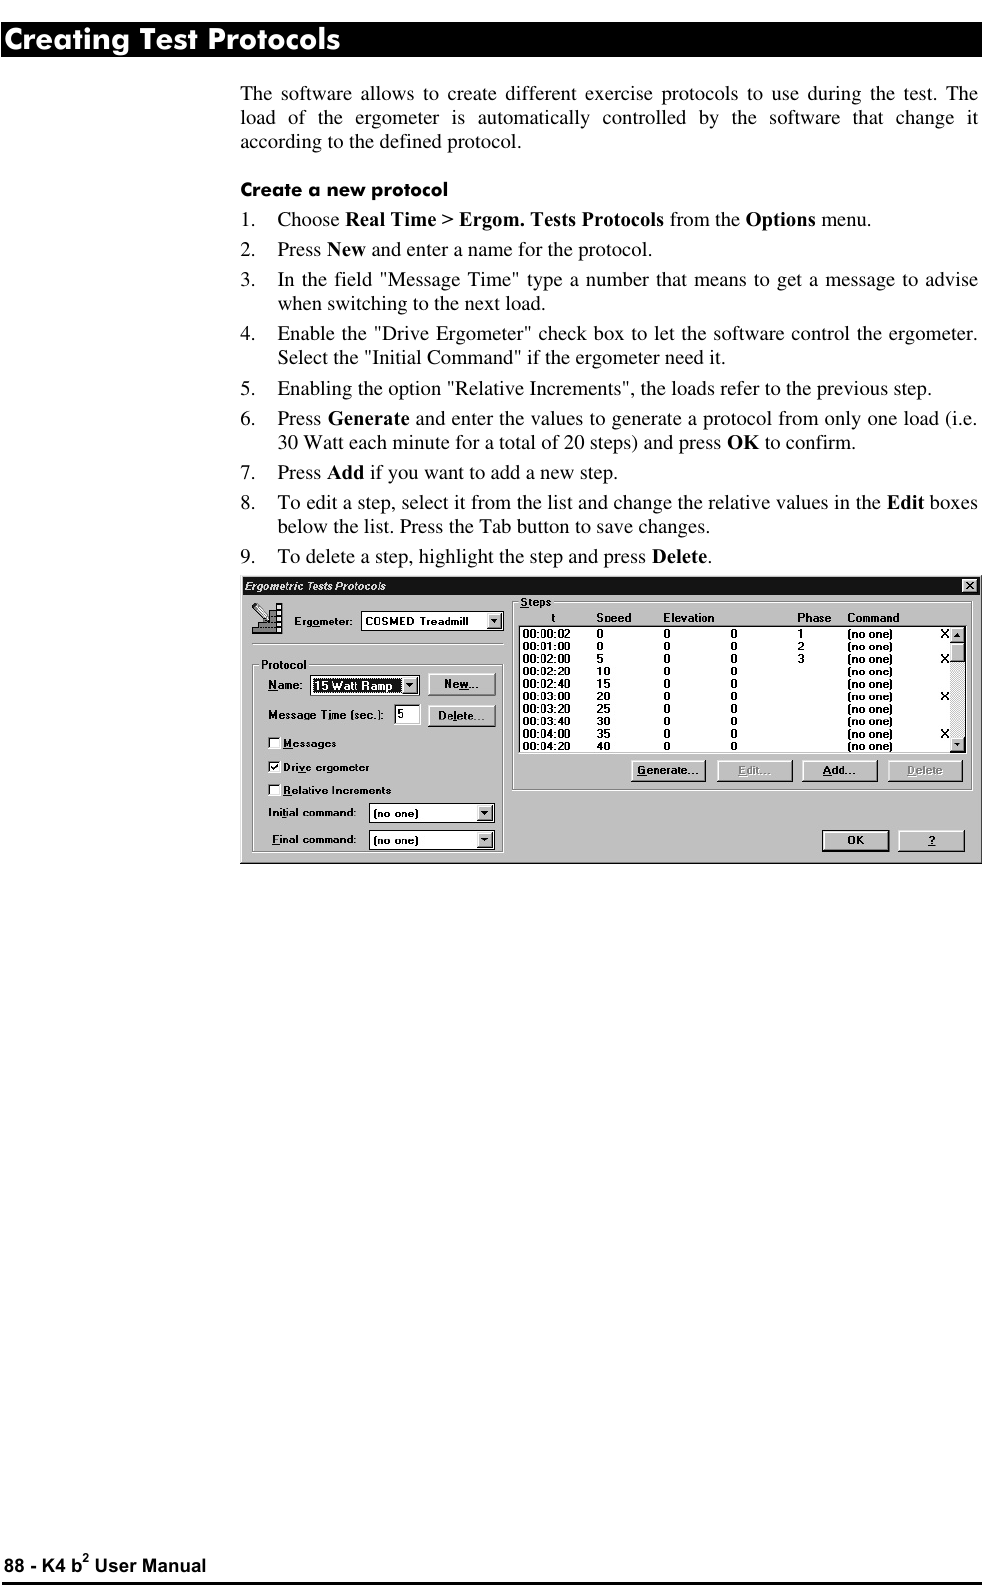  88 - K4 b2 User Manual Creating Test Protocols The software allows to create different exercise protocols to use during the test. The load of the ergometer is automatically controlled by the software that change it according to the defined protocol. Create a new protocol 1.  Choose Real Time &gt; Ergom. Tests Protocols from the Options menu. 2. Press New and enter a name for the protocol. 3. In the field &quot;Message Time&quot; type a number that means to get a message to advise when switching to the next load. 4. Enable the &quot;Drive Ergometer&quot; check box to let the software control the ergometer. Select the &quot;Initial Command&quot; if the ergometer need it. 5. Enabling the option &quot;Relative Increments&quot;, the loads refer to the previous step. 6. Press Generate and enter the values to generate a protocol from only one load (i.e. 30 Watt each minute for a total of 20 steps) and press OK to confirm. 7. Press Add if you want to add a new step. 8. To edit a step, select it from the list and change the relative values in the Edit boxes below the list. Press the Tab button to save changes. 9. To delete a step, highlight the step and press Delete.  